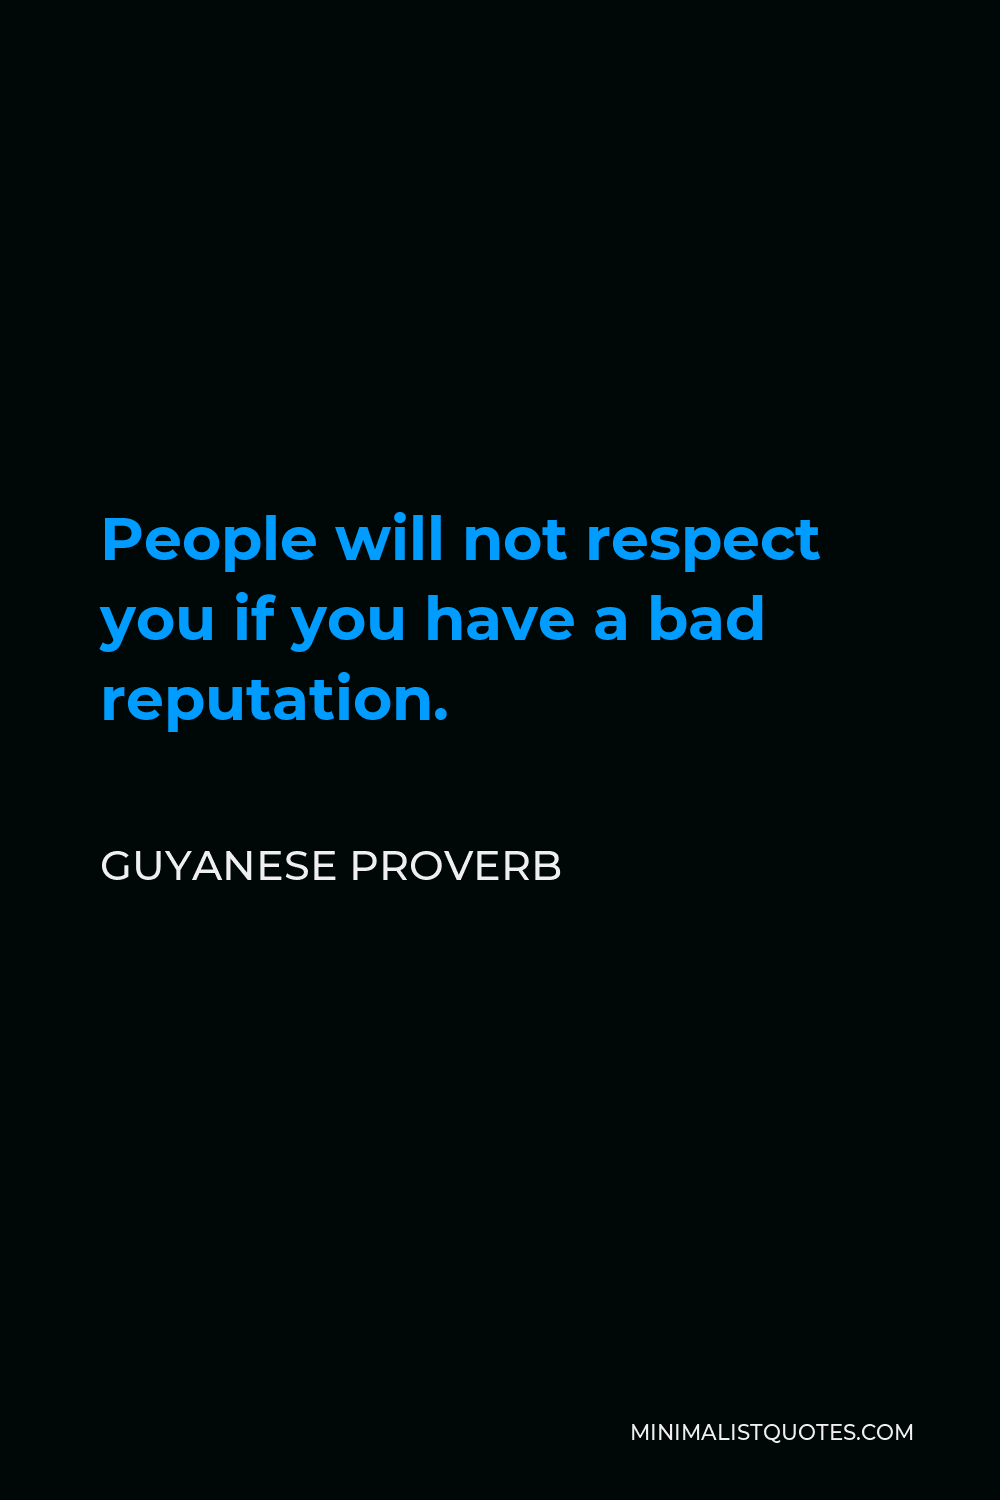 Guyanese Proverb Quote - People will not respect you if you have a bad reputation.